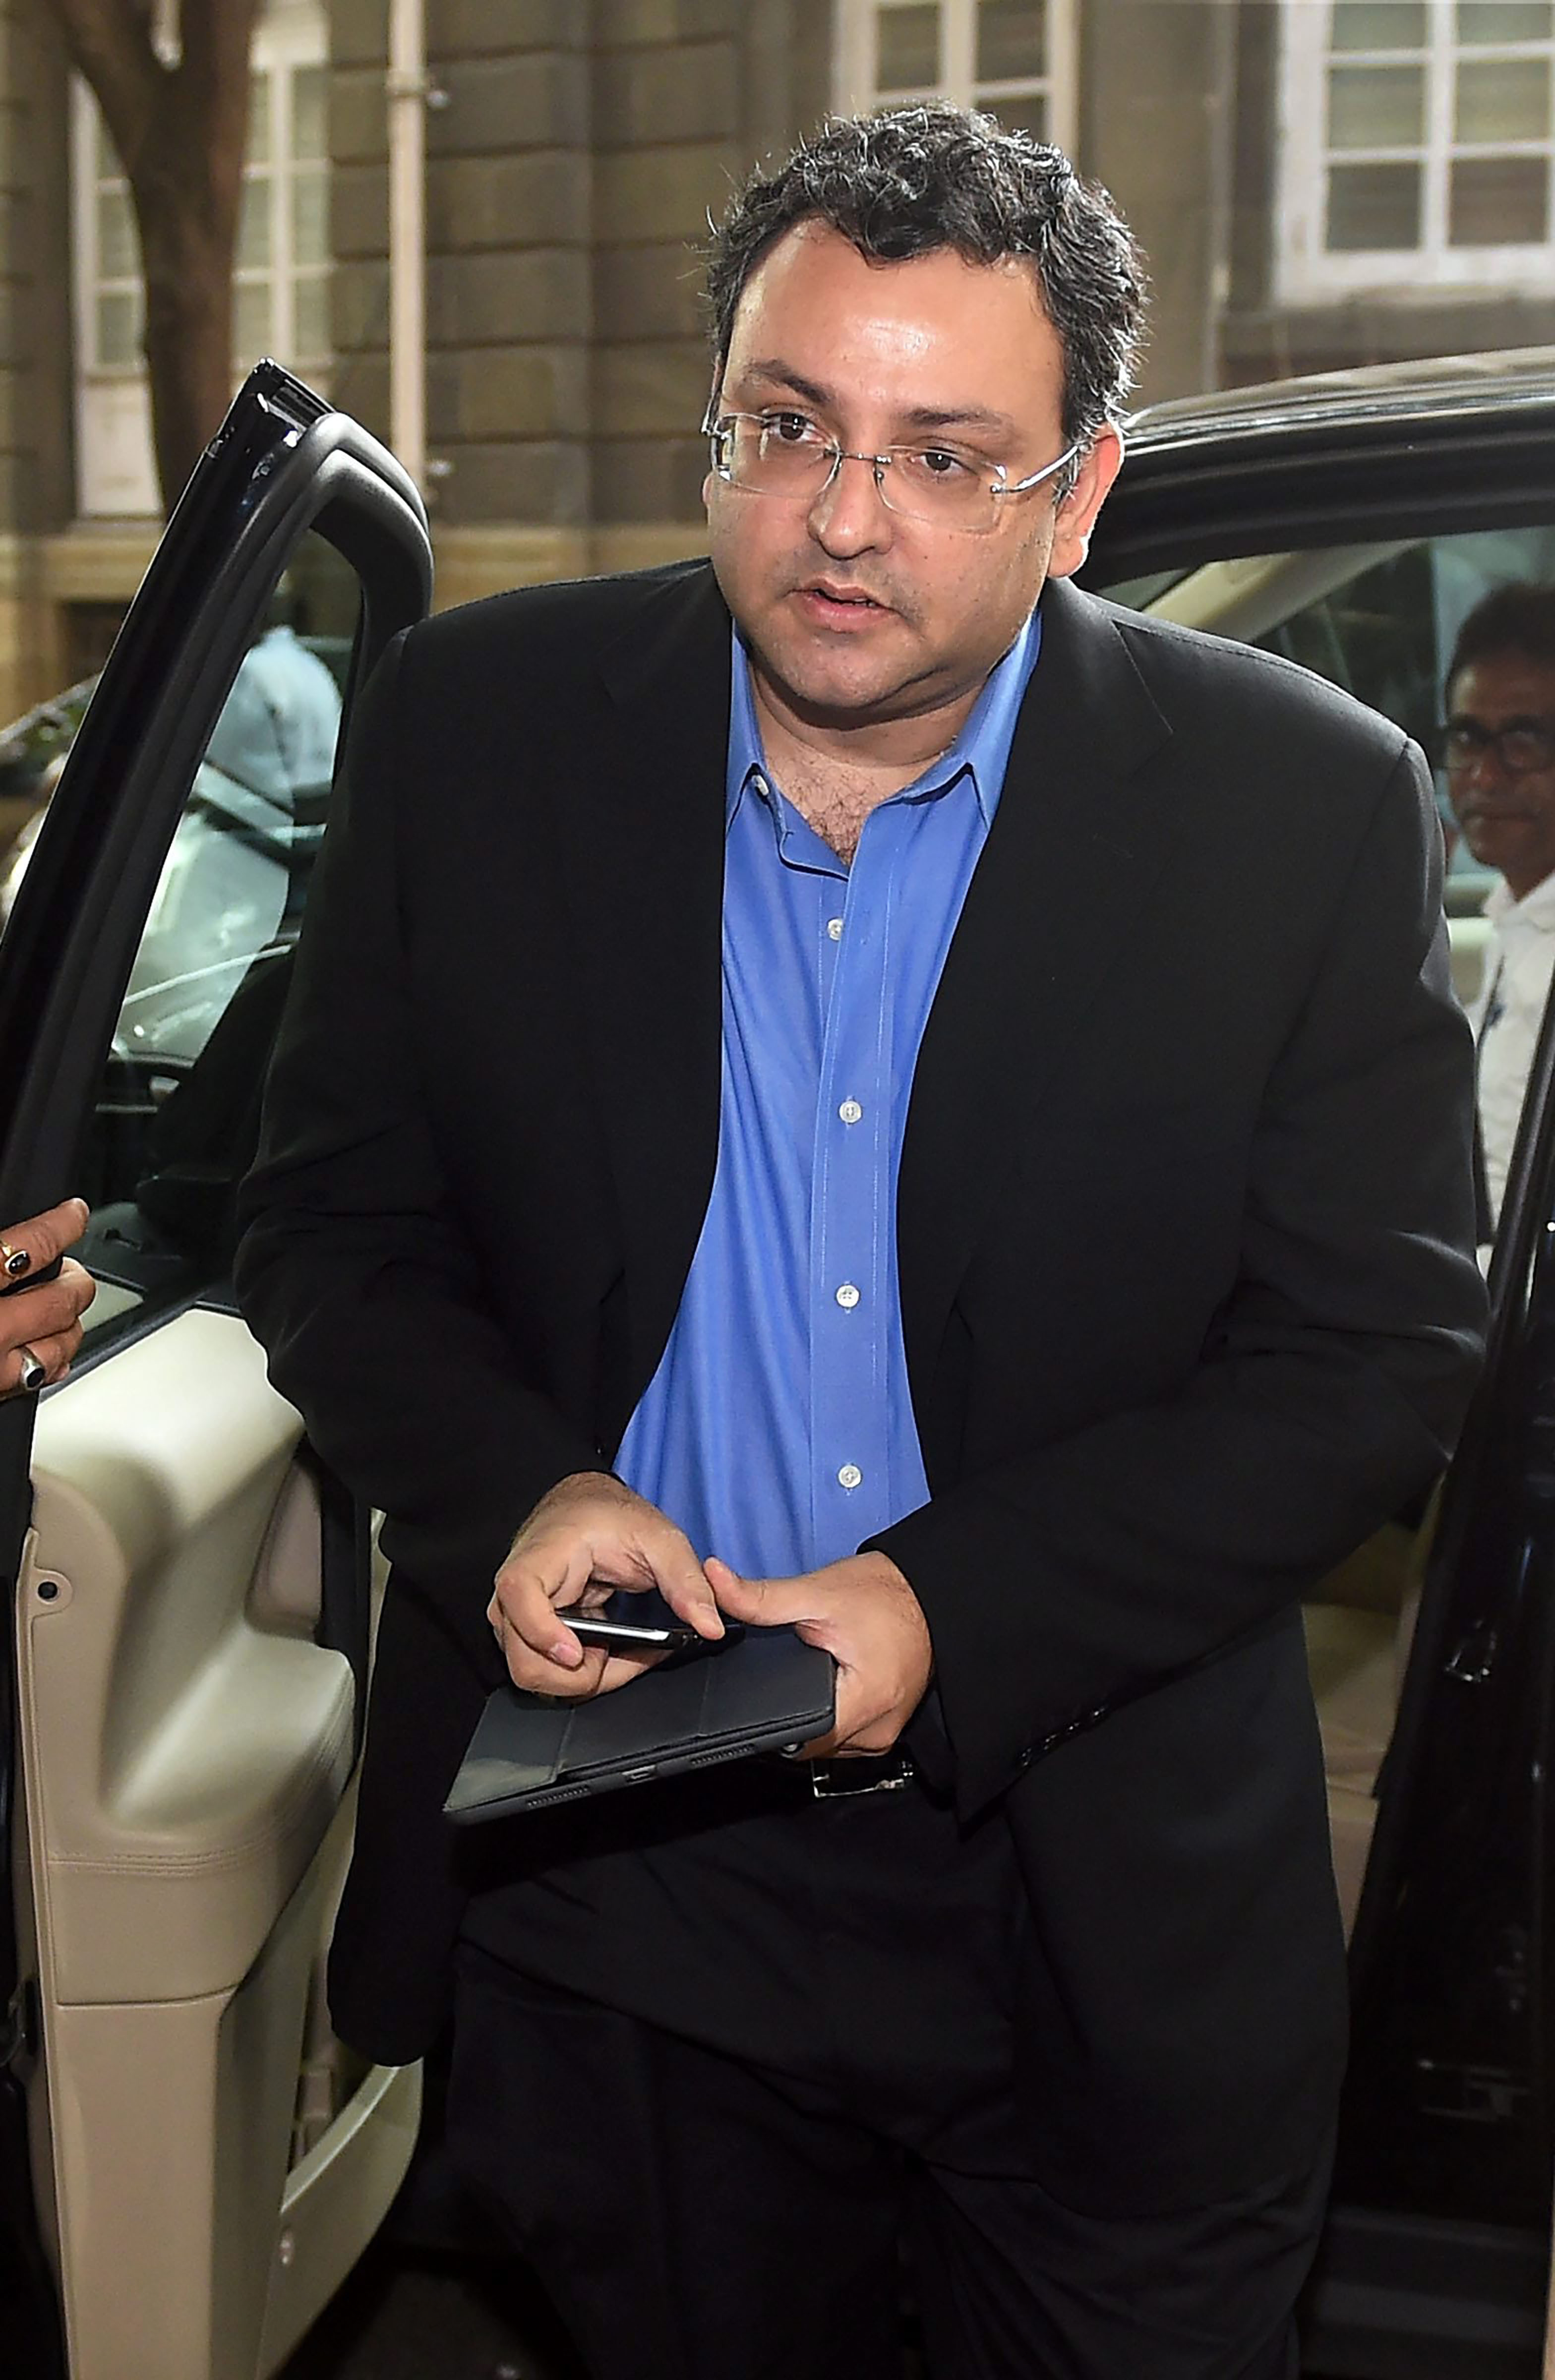 In this November 14, 2016 file photo, ousted Tata Sons chairman Cyrus Mistry arrives for Tata Motors board meeting at Bombay House in Mumbai. The Supreme Court on Friday, January 10, 2020. stayed the NCLAT order restoring Mistry as executive chairman of the Tata Group.